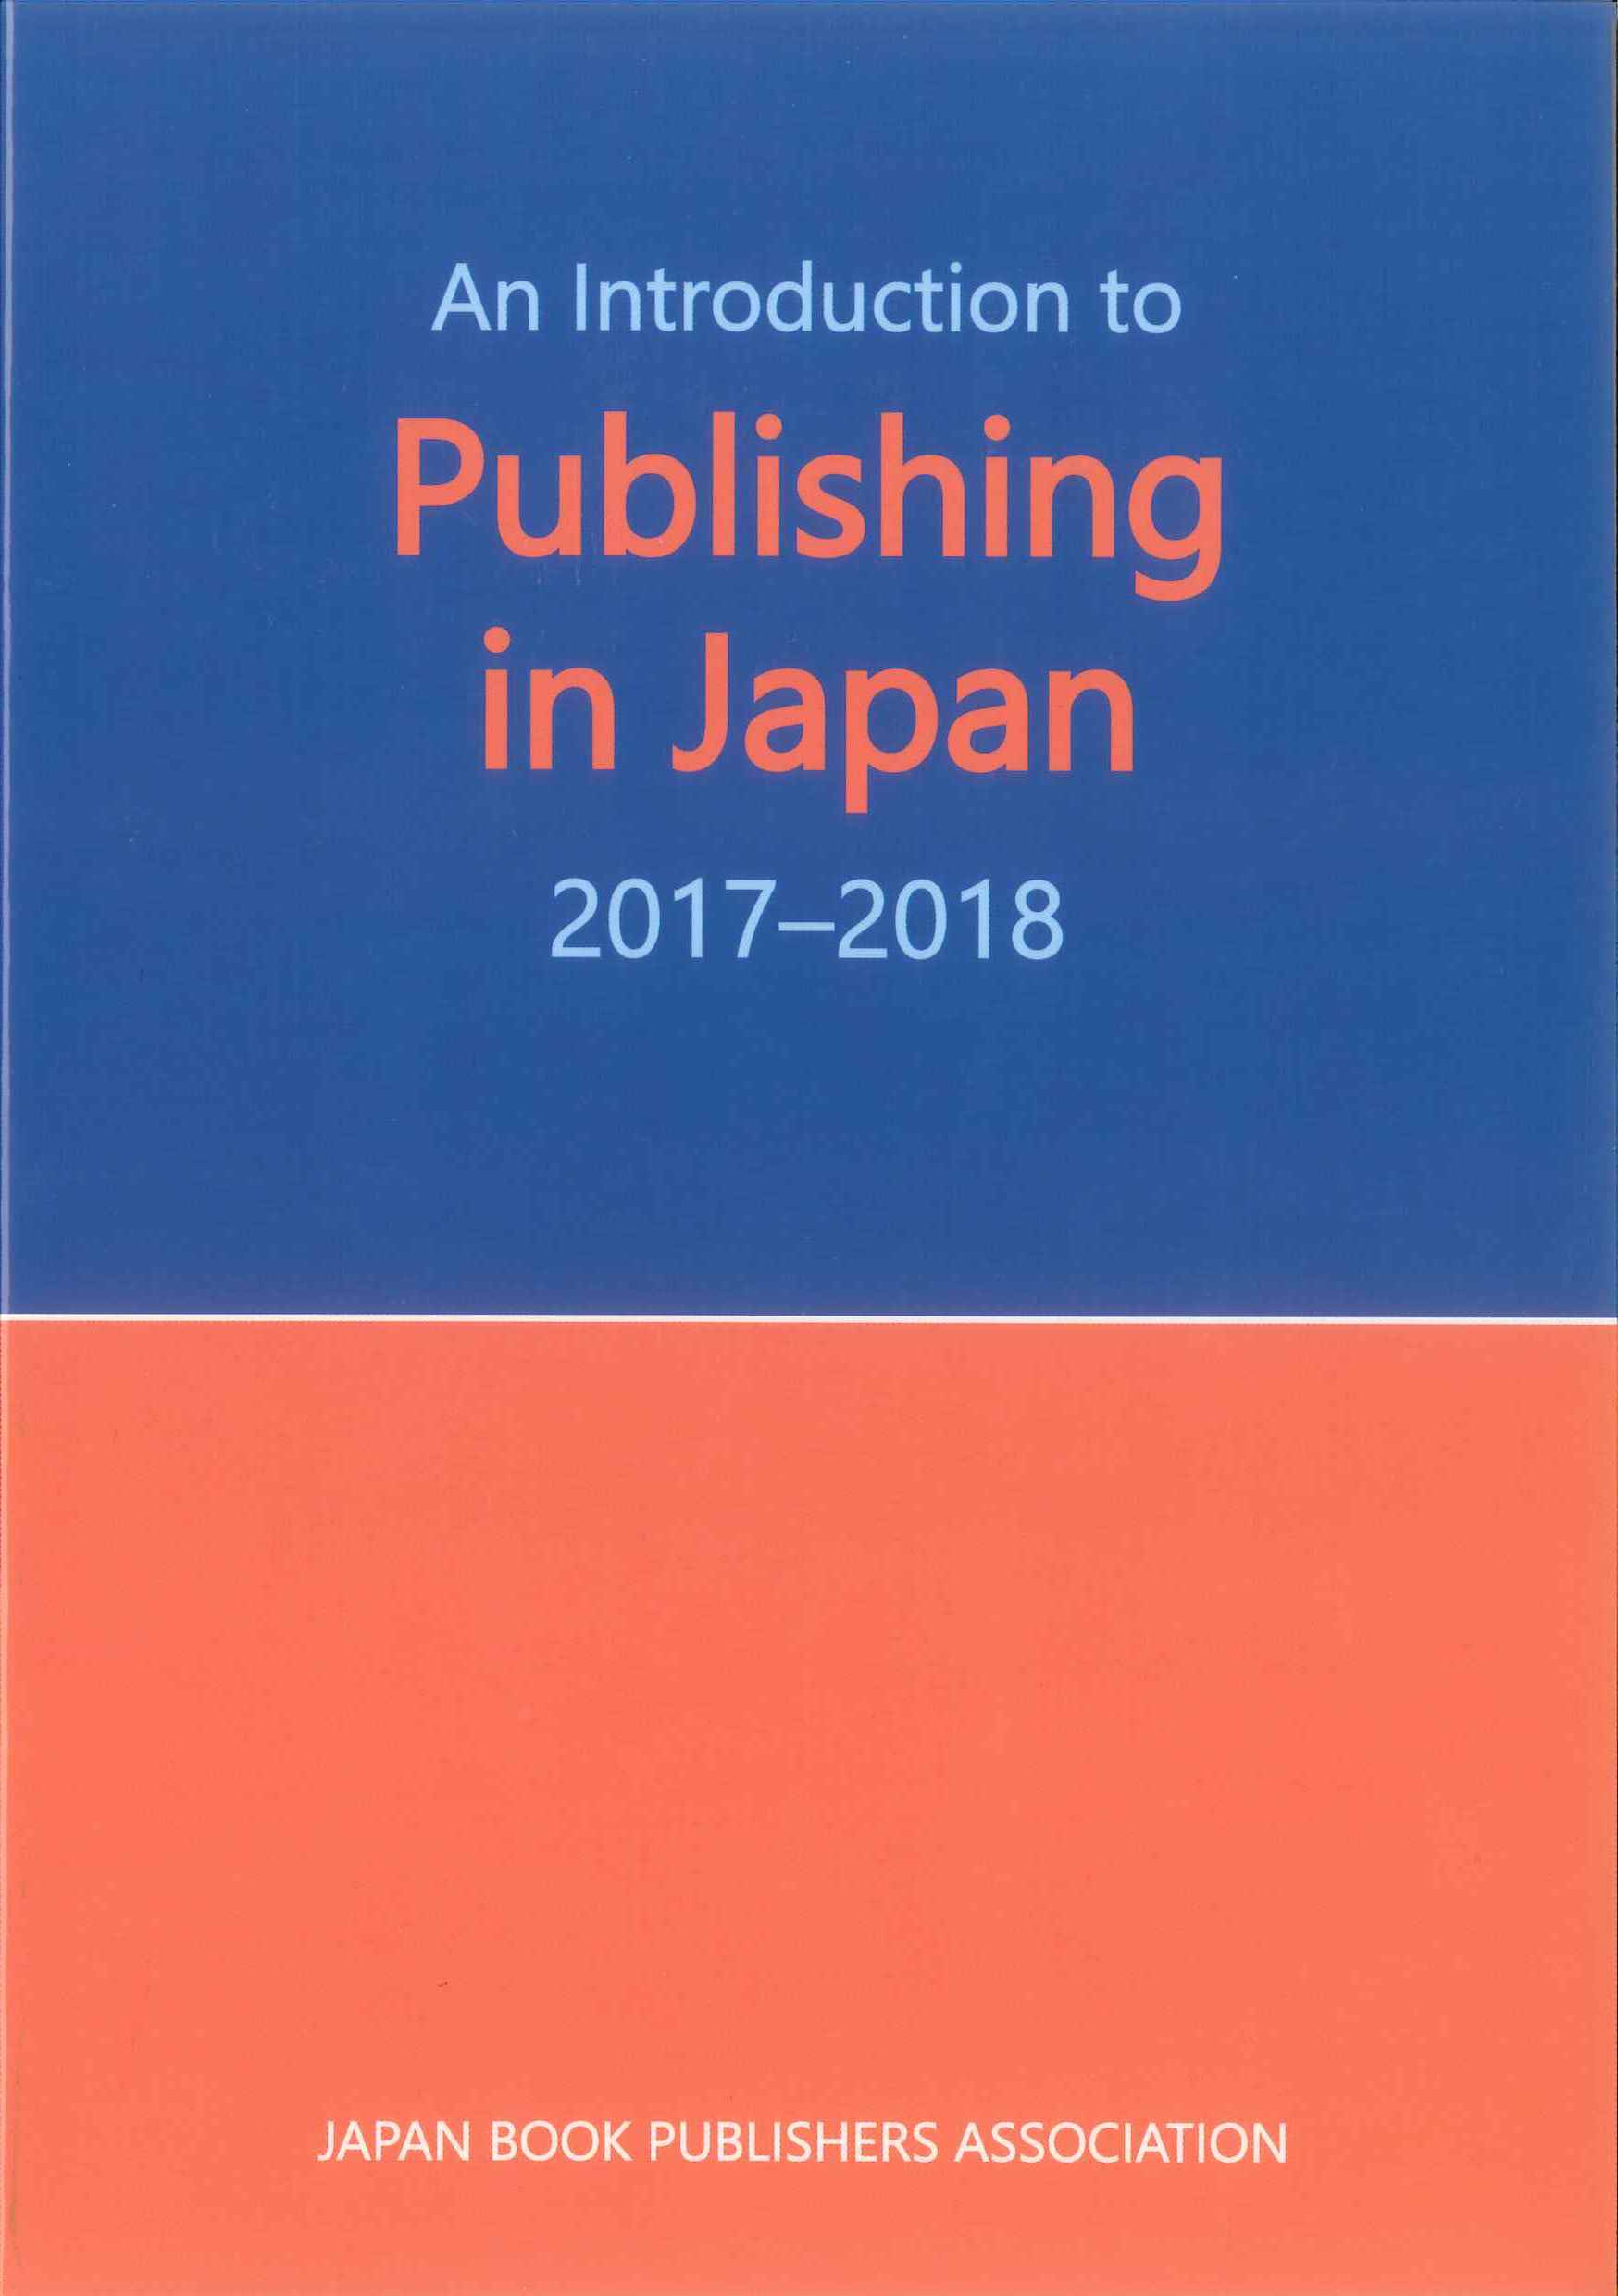 An Introduction to Publishing in Japan 2017-2018の商品画像